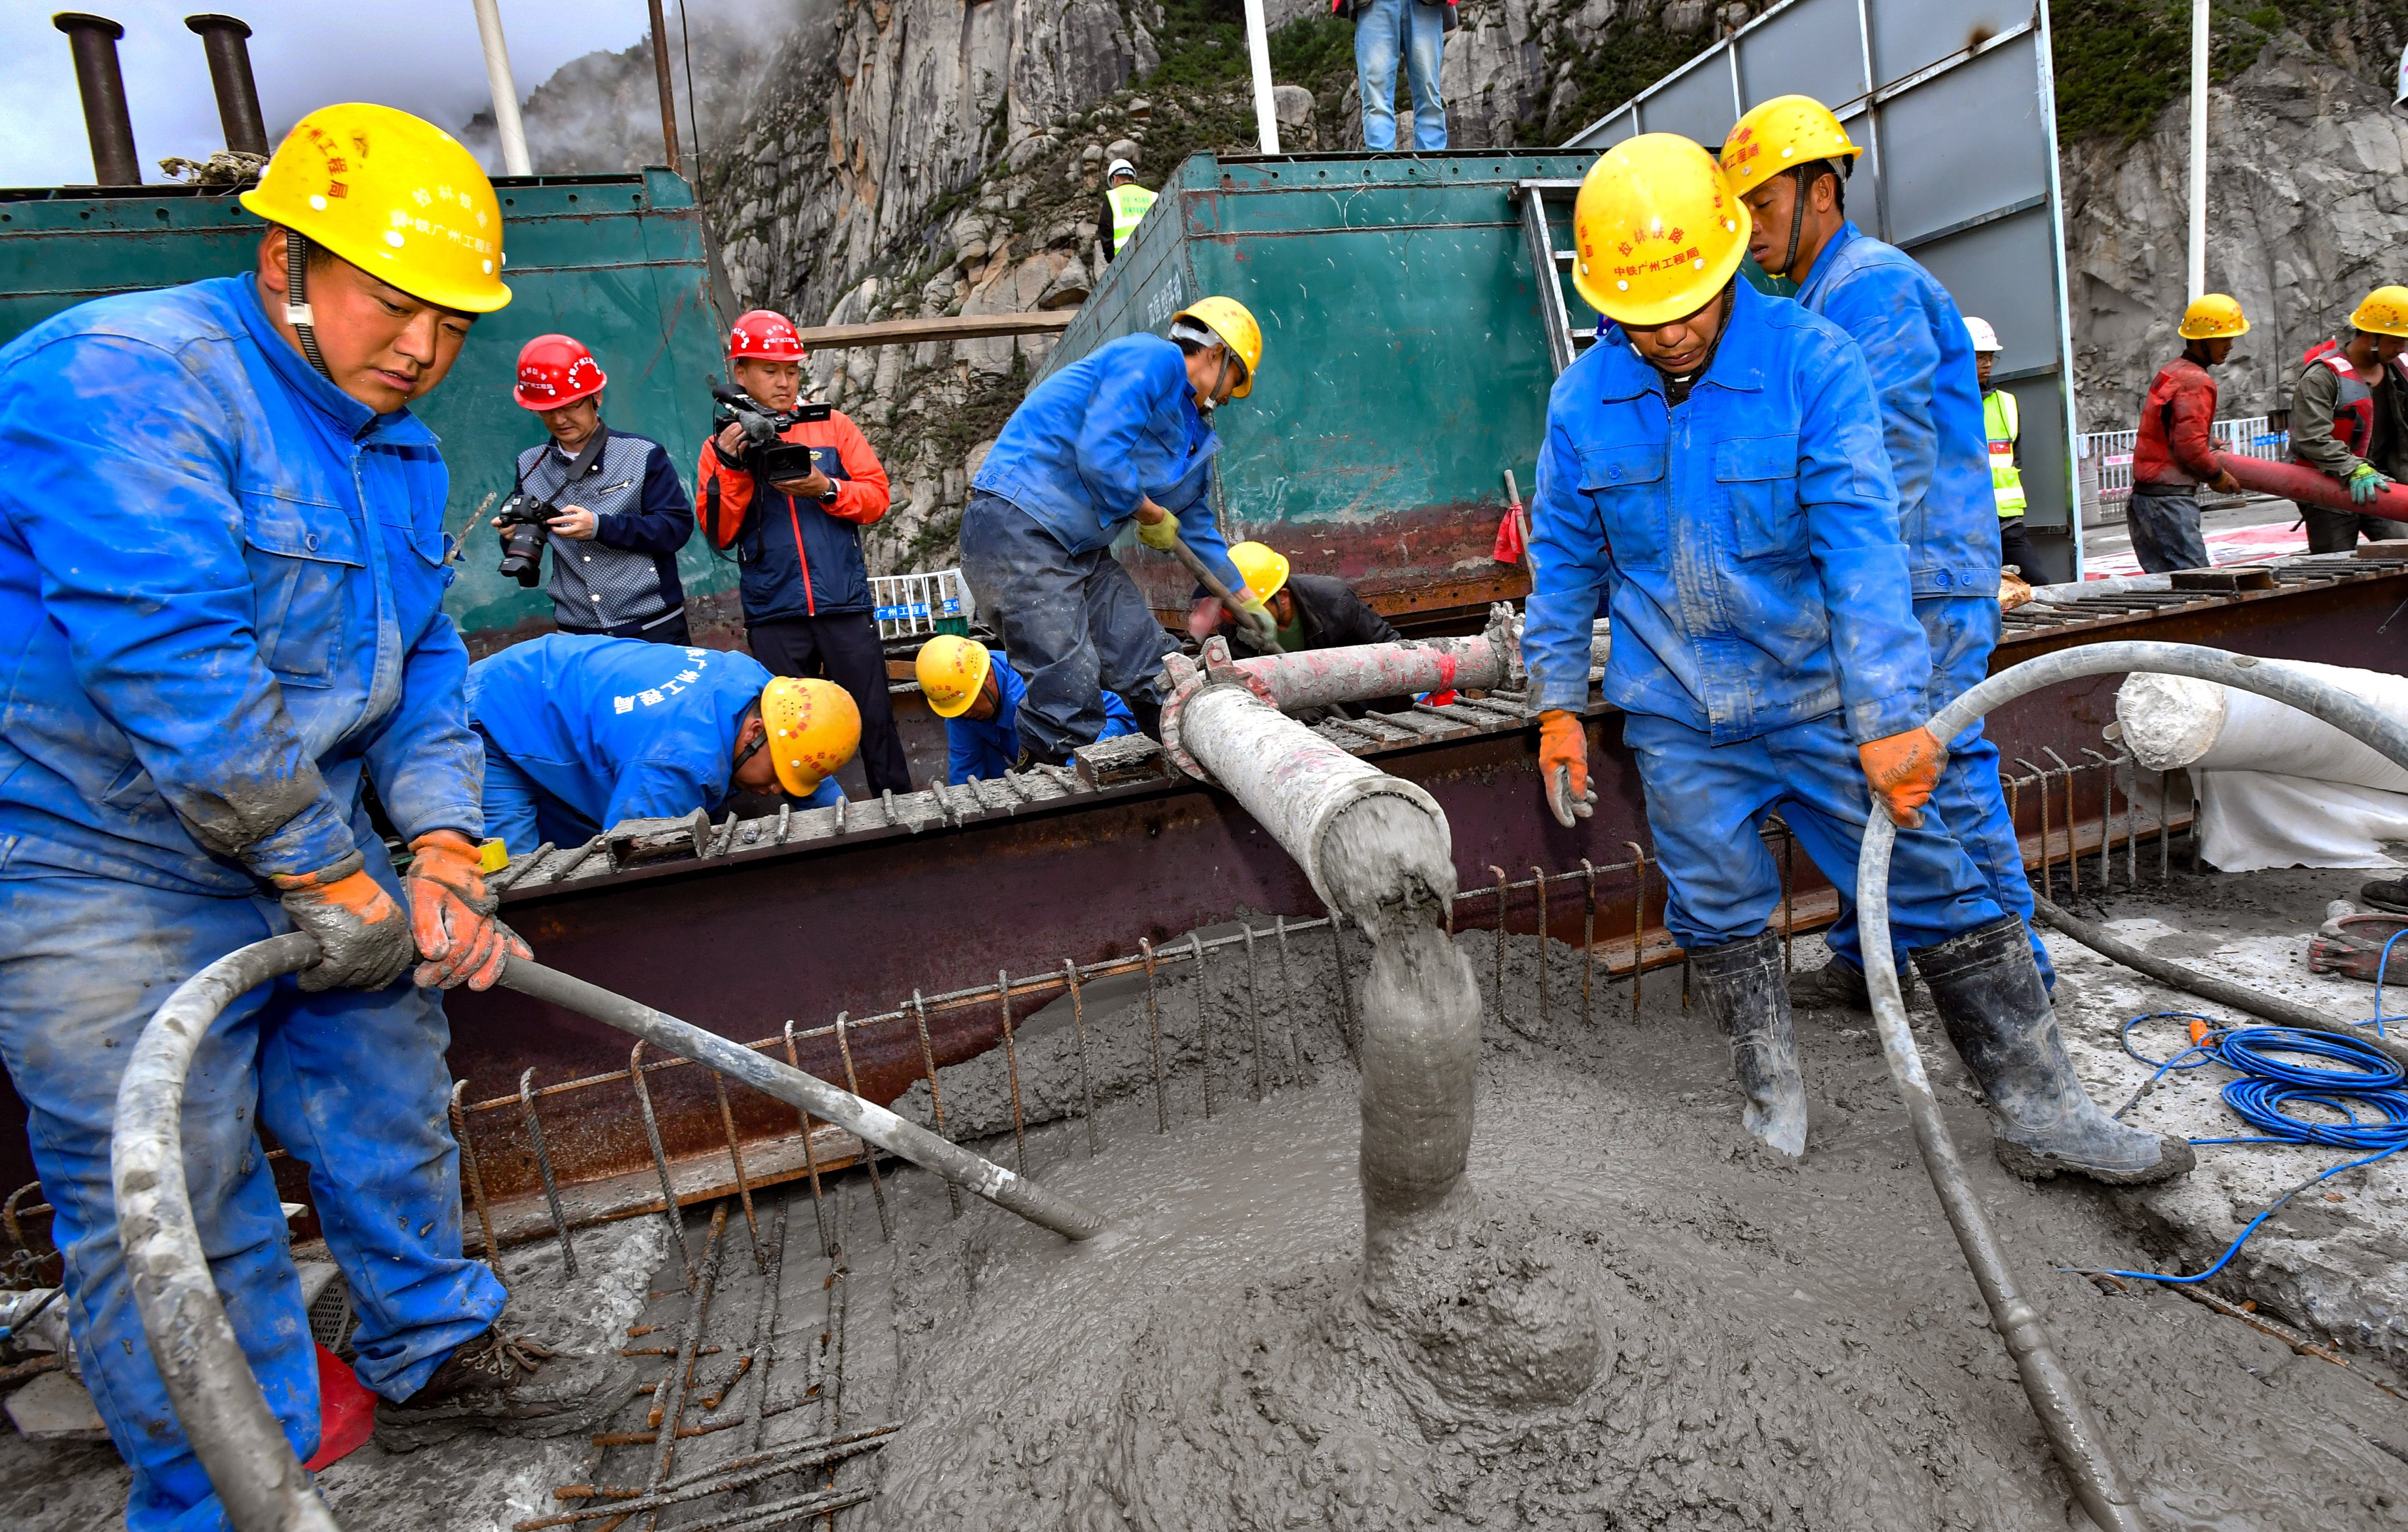 Concrete is poured during construction of a bridge across the Yarlung Zangbo river in southwest China’s Tibet autonomous region in June 2020. China’s cement sector needs to urgently cut emissions. Photo: Xinhua